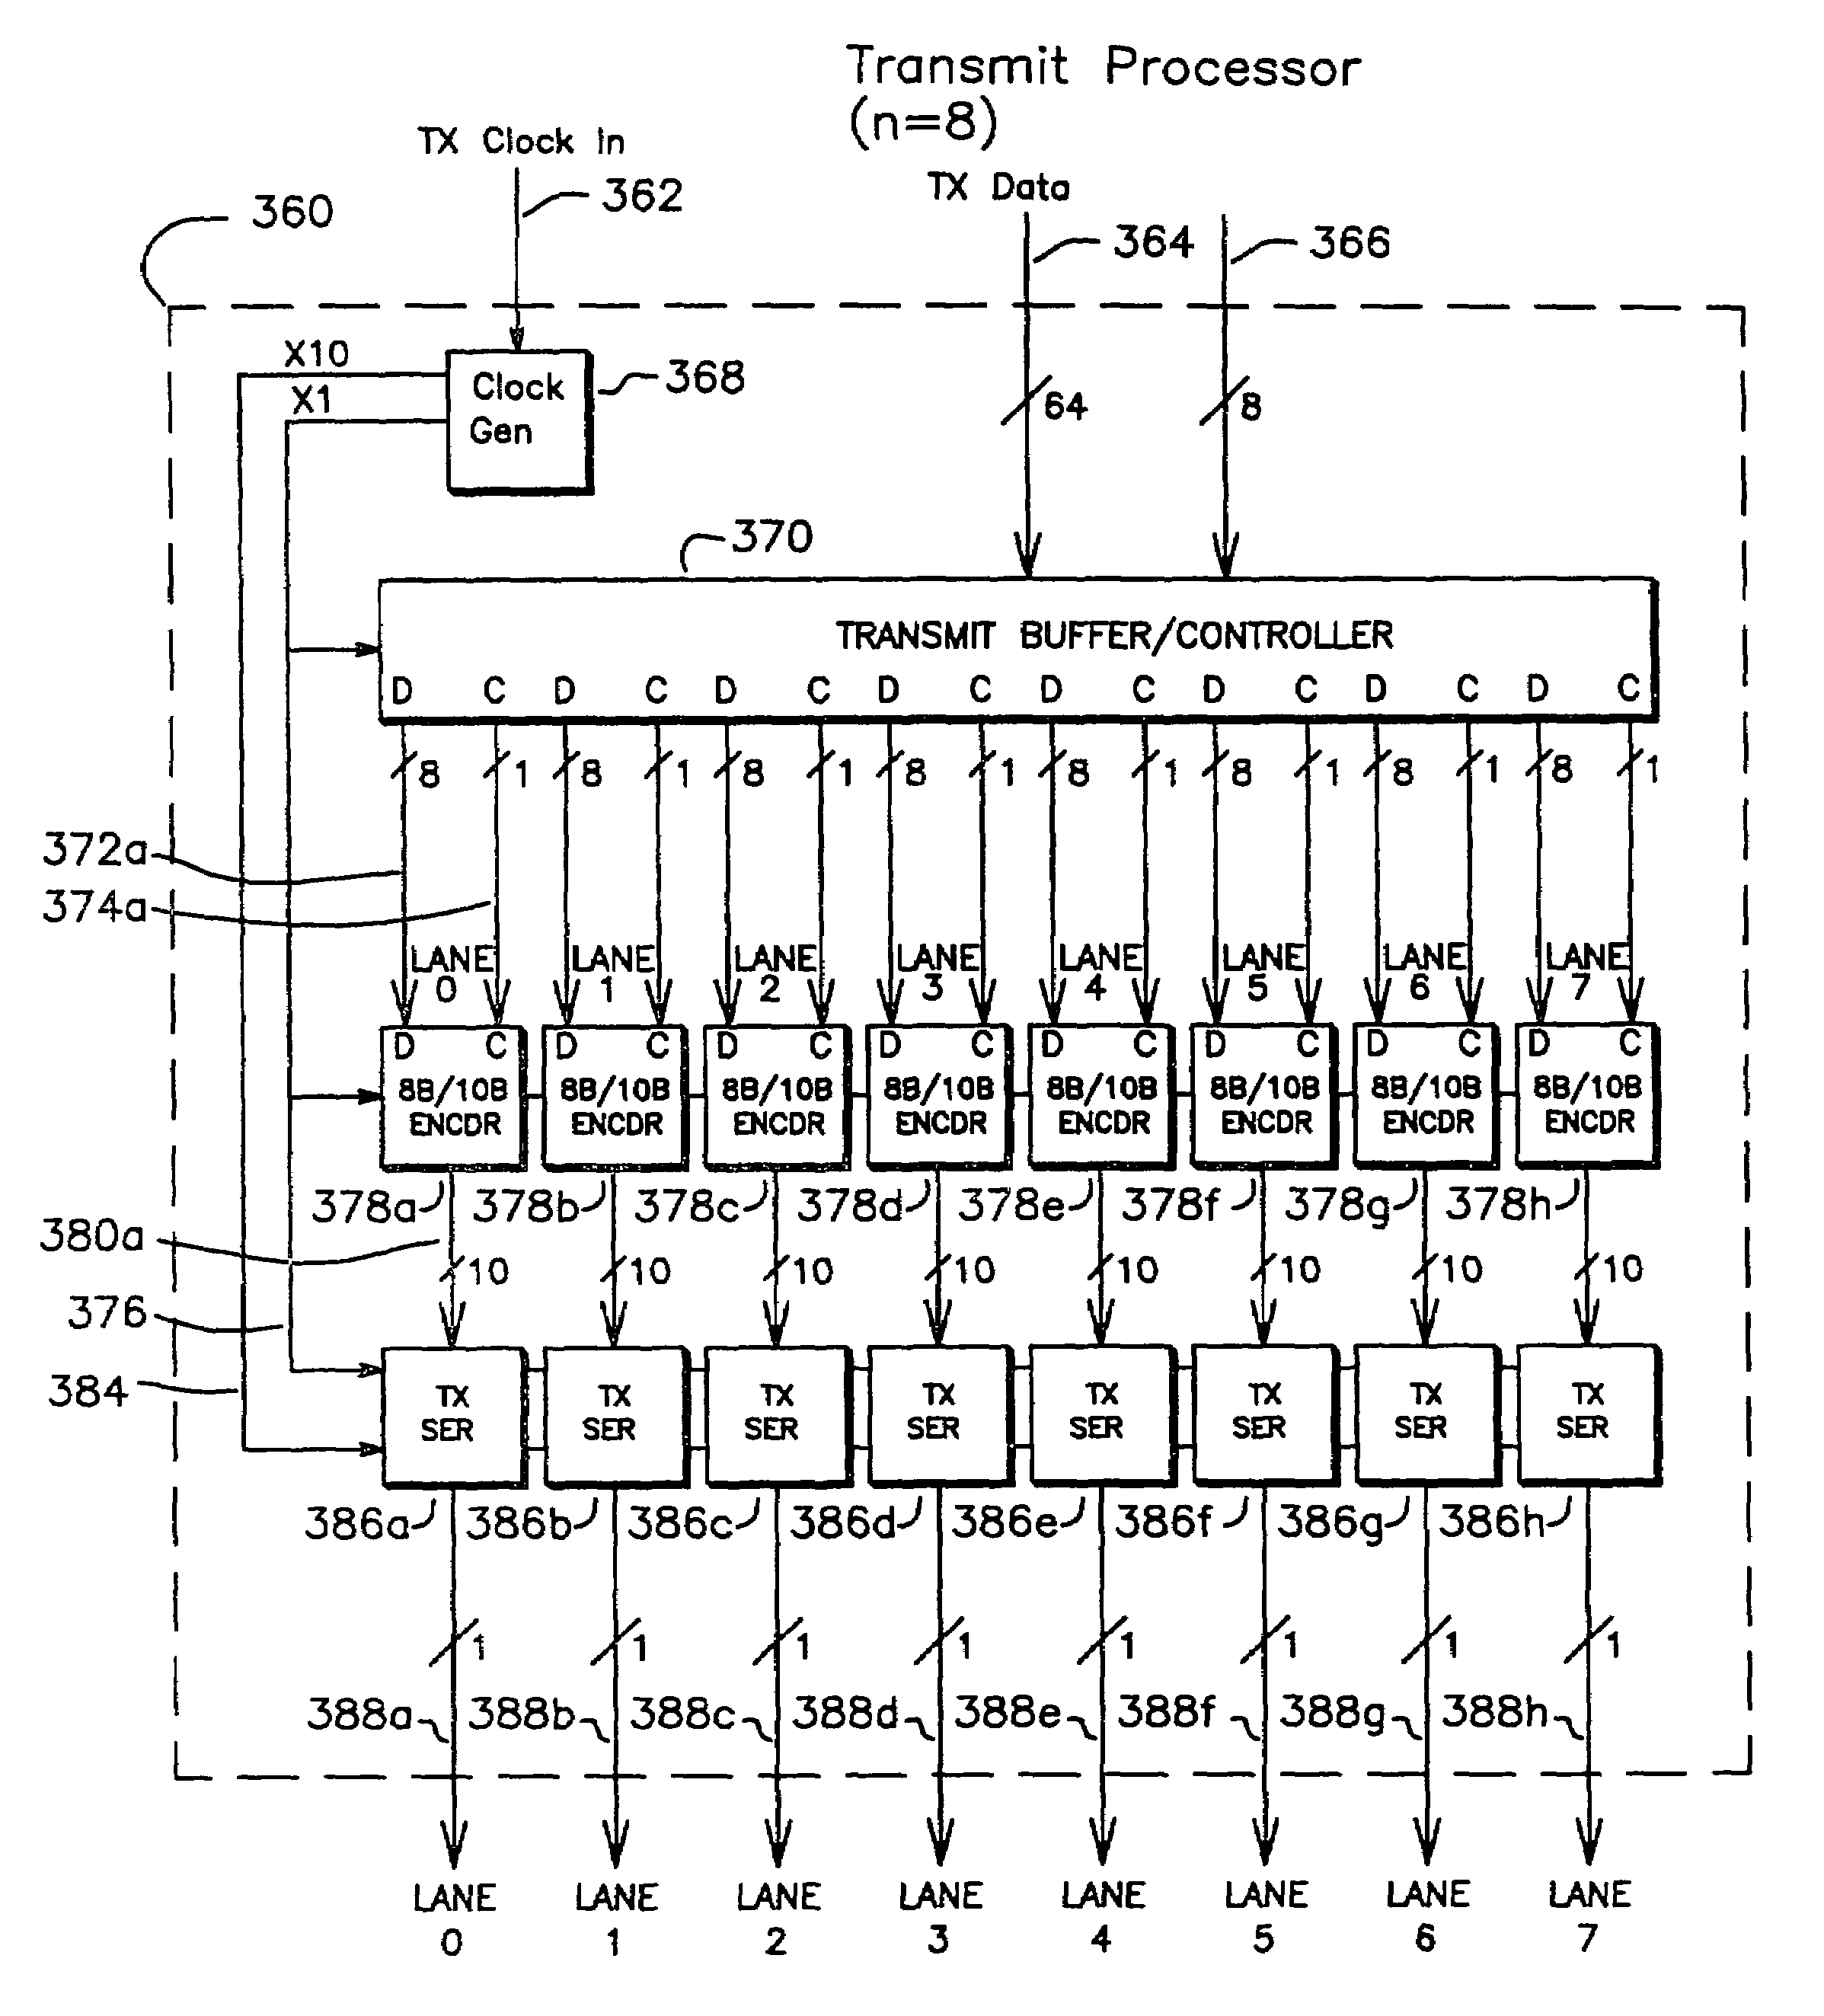 Multi-function high-speed network interface